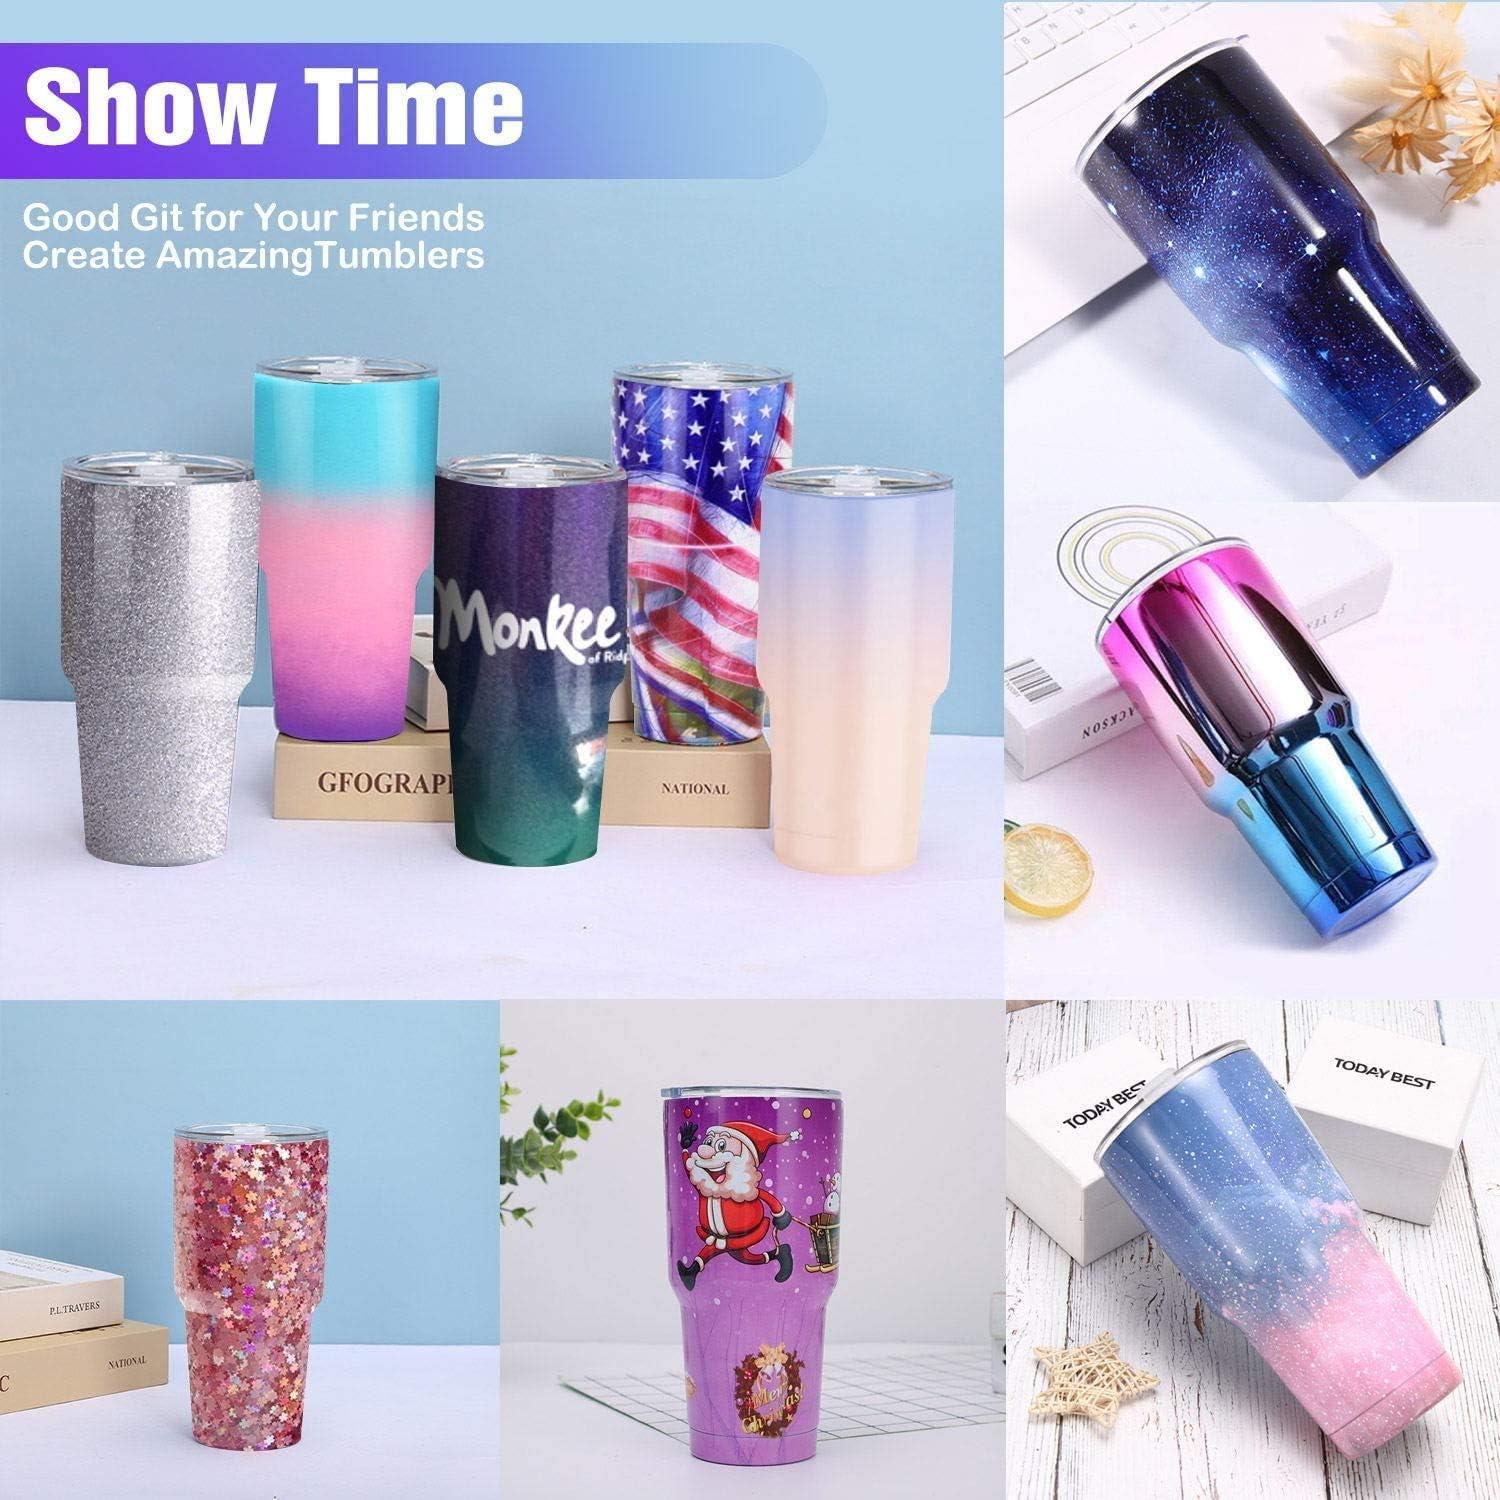 Buy Tumbler Turner Machine, Cup Turner for Crafts kit for tumblers